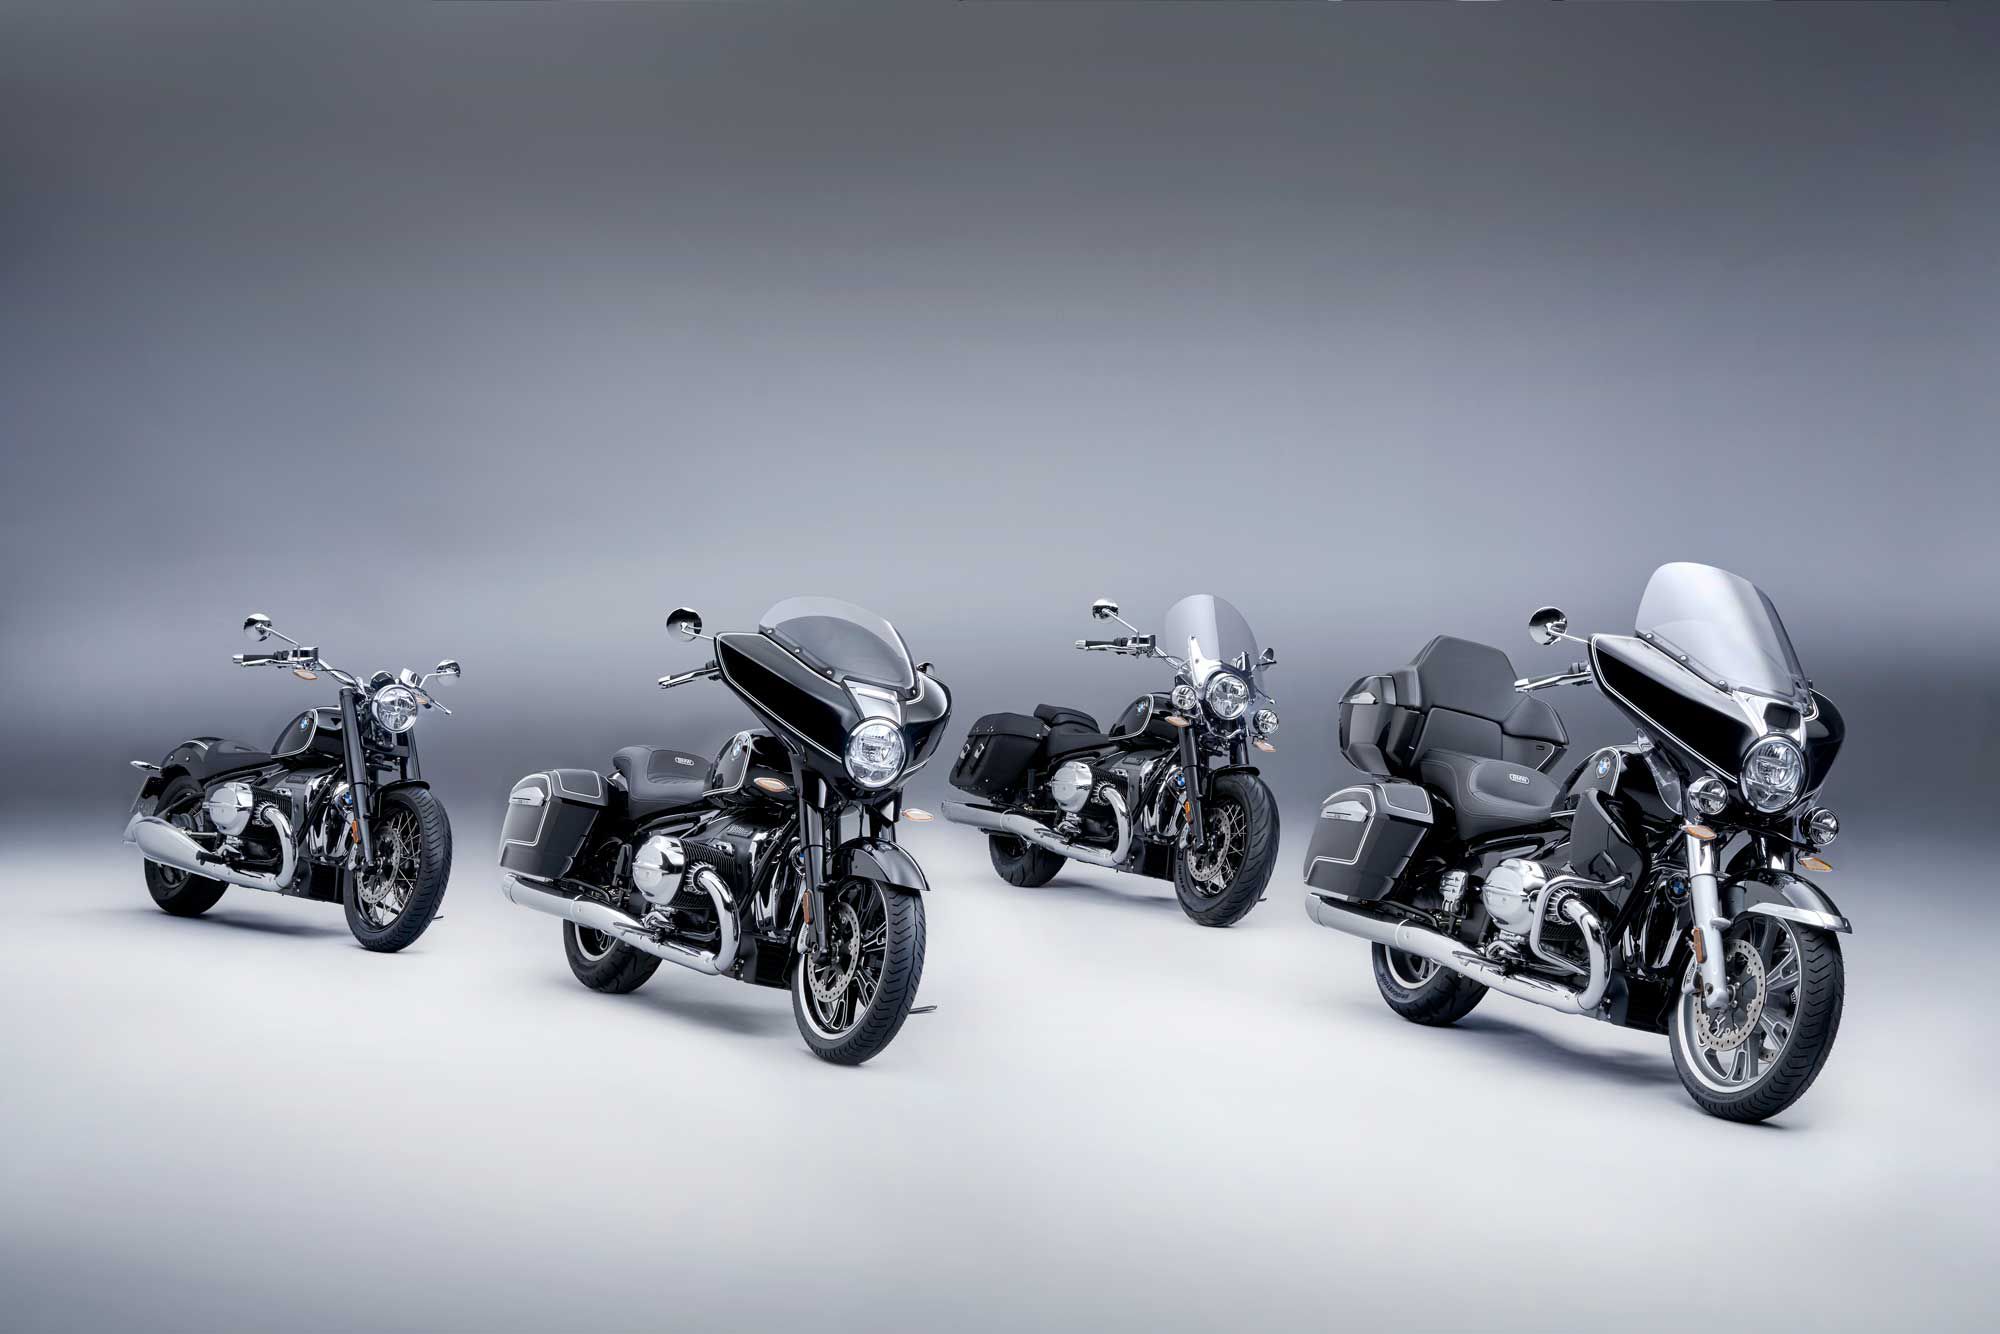 The family of BMW cruiser, including the R 18 and R 18 Classic along with the new R 18 B and R 18 Transcontinental.